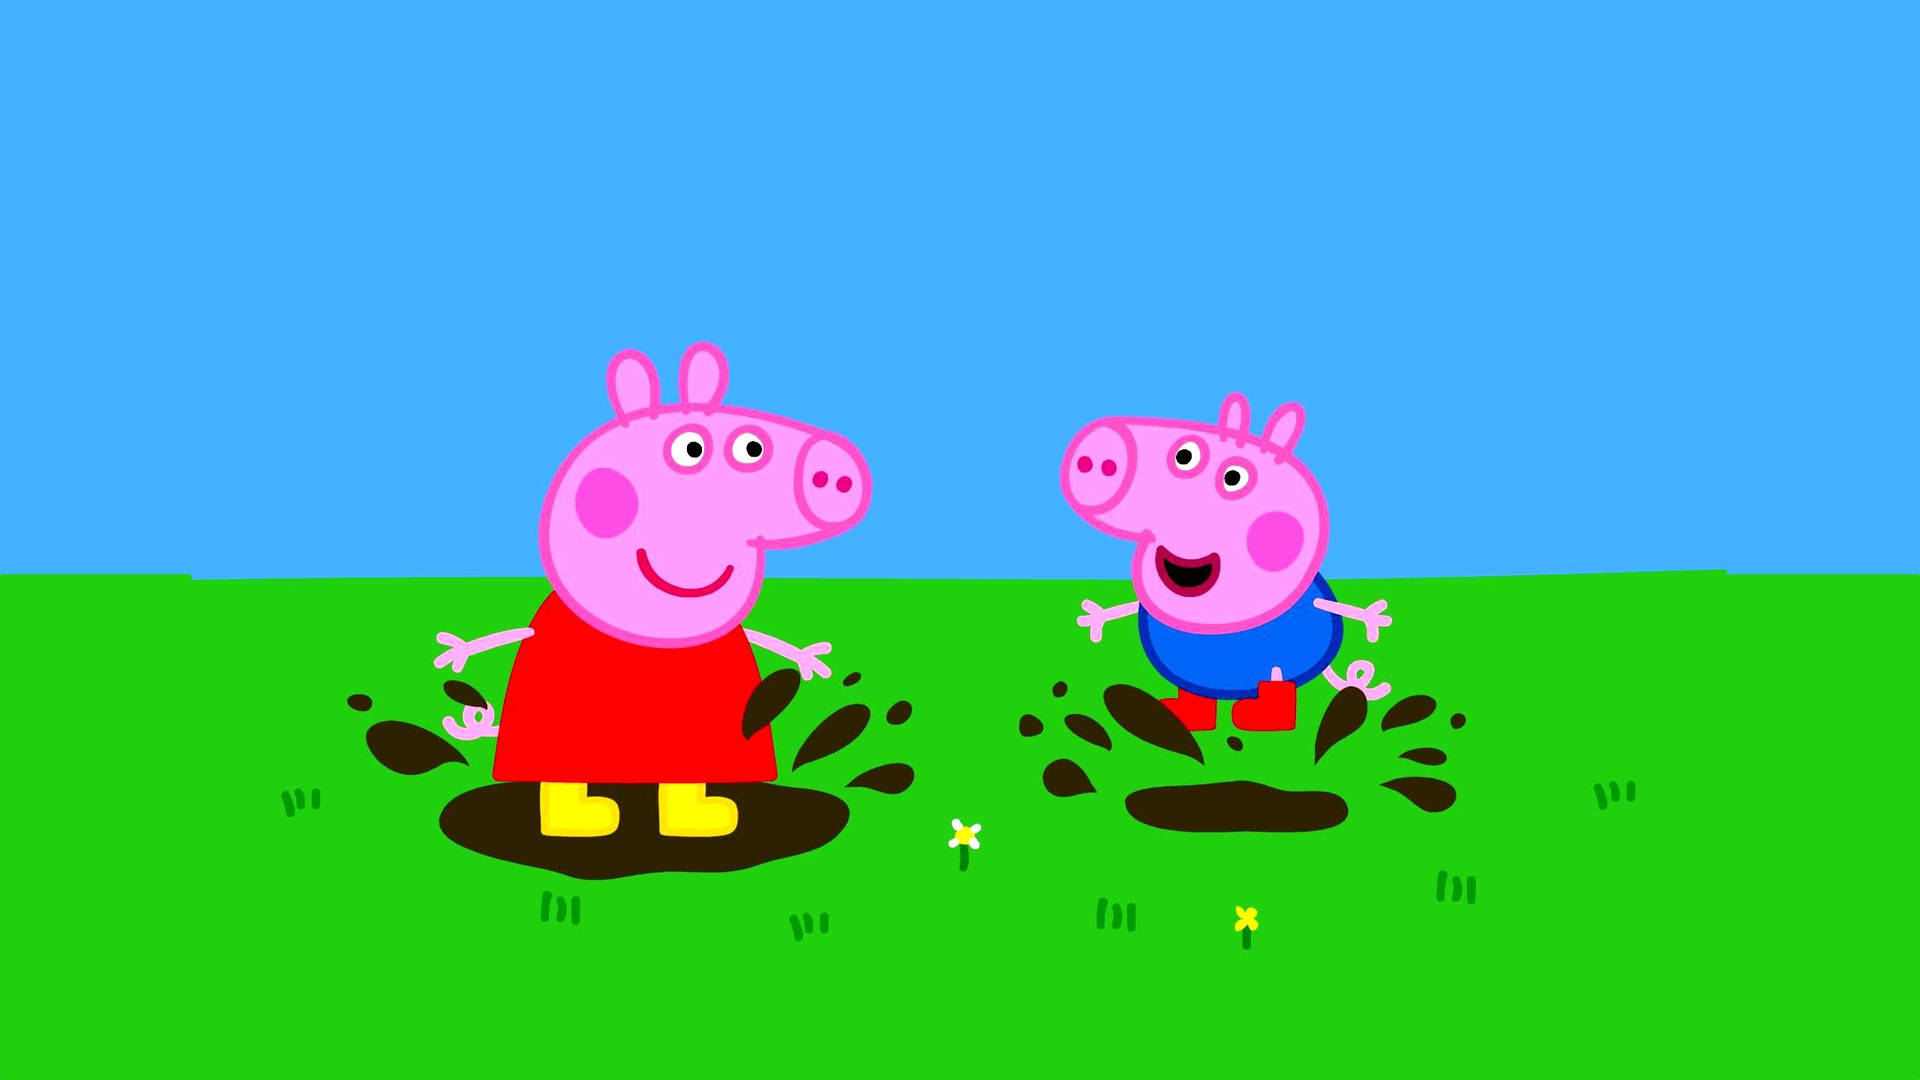 Peppa Pig and George Pig jumping in the puddle oversaturated wallpaper.